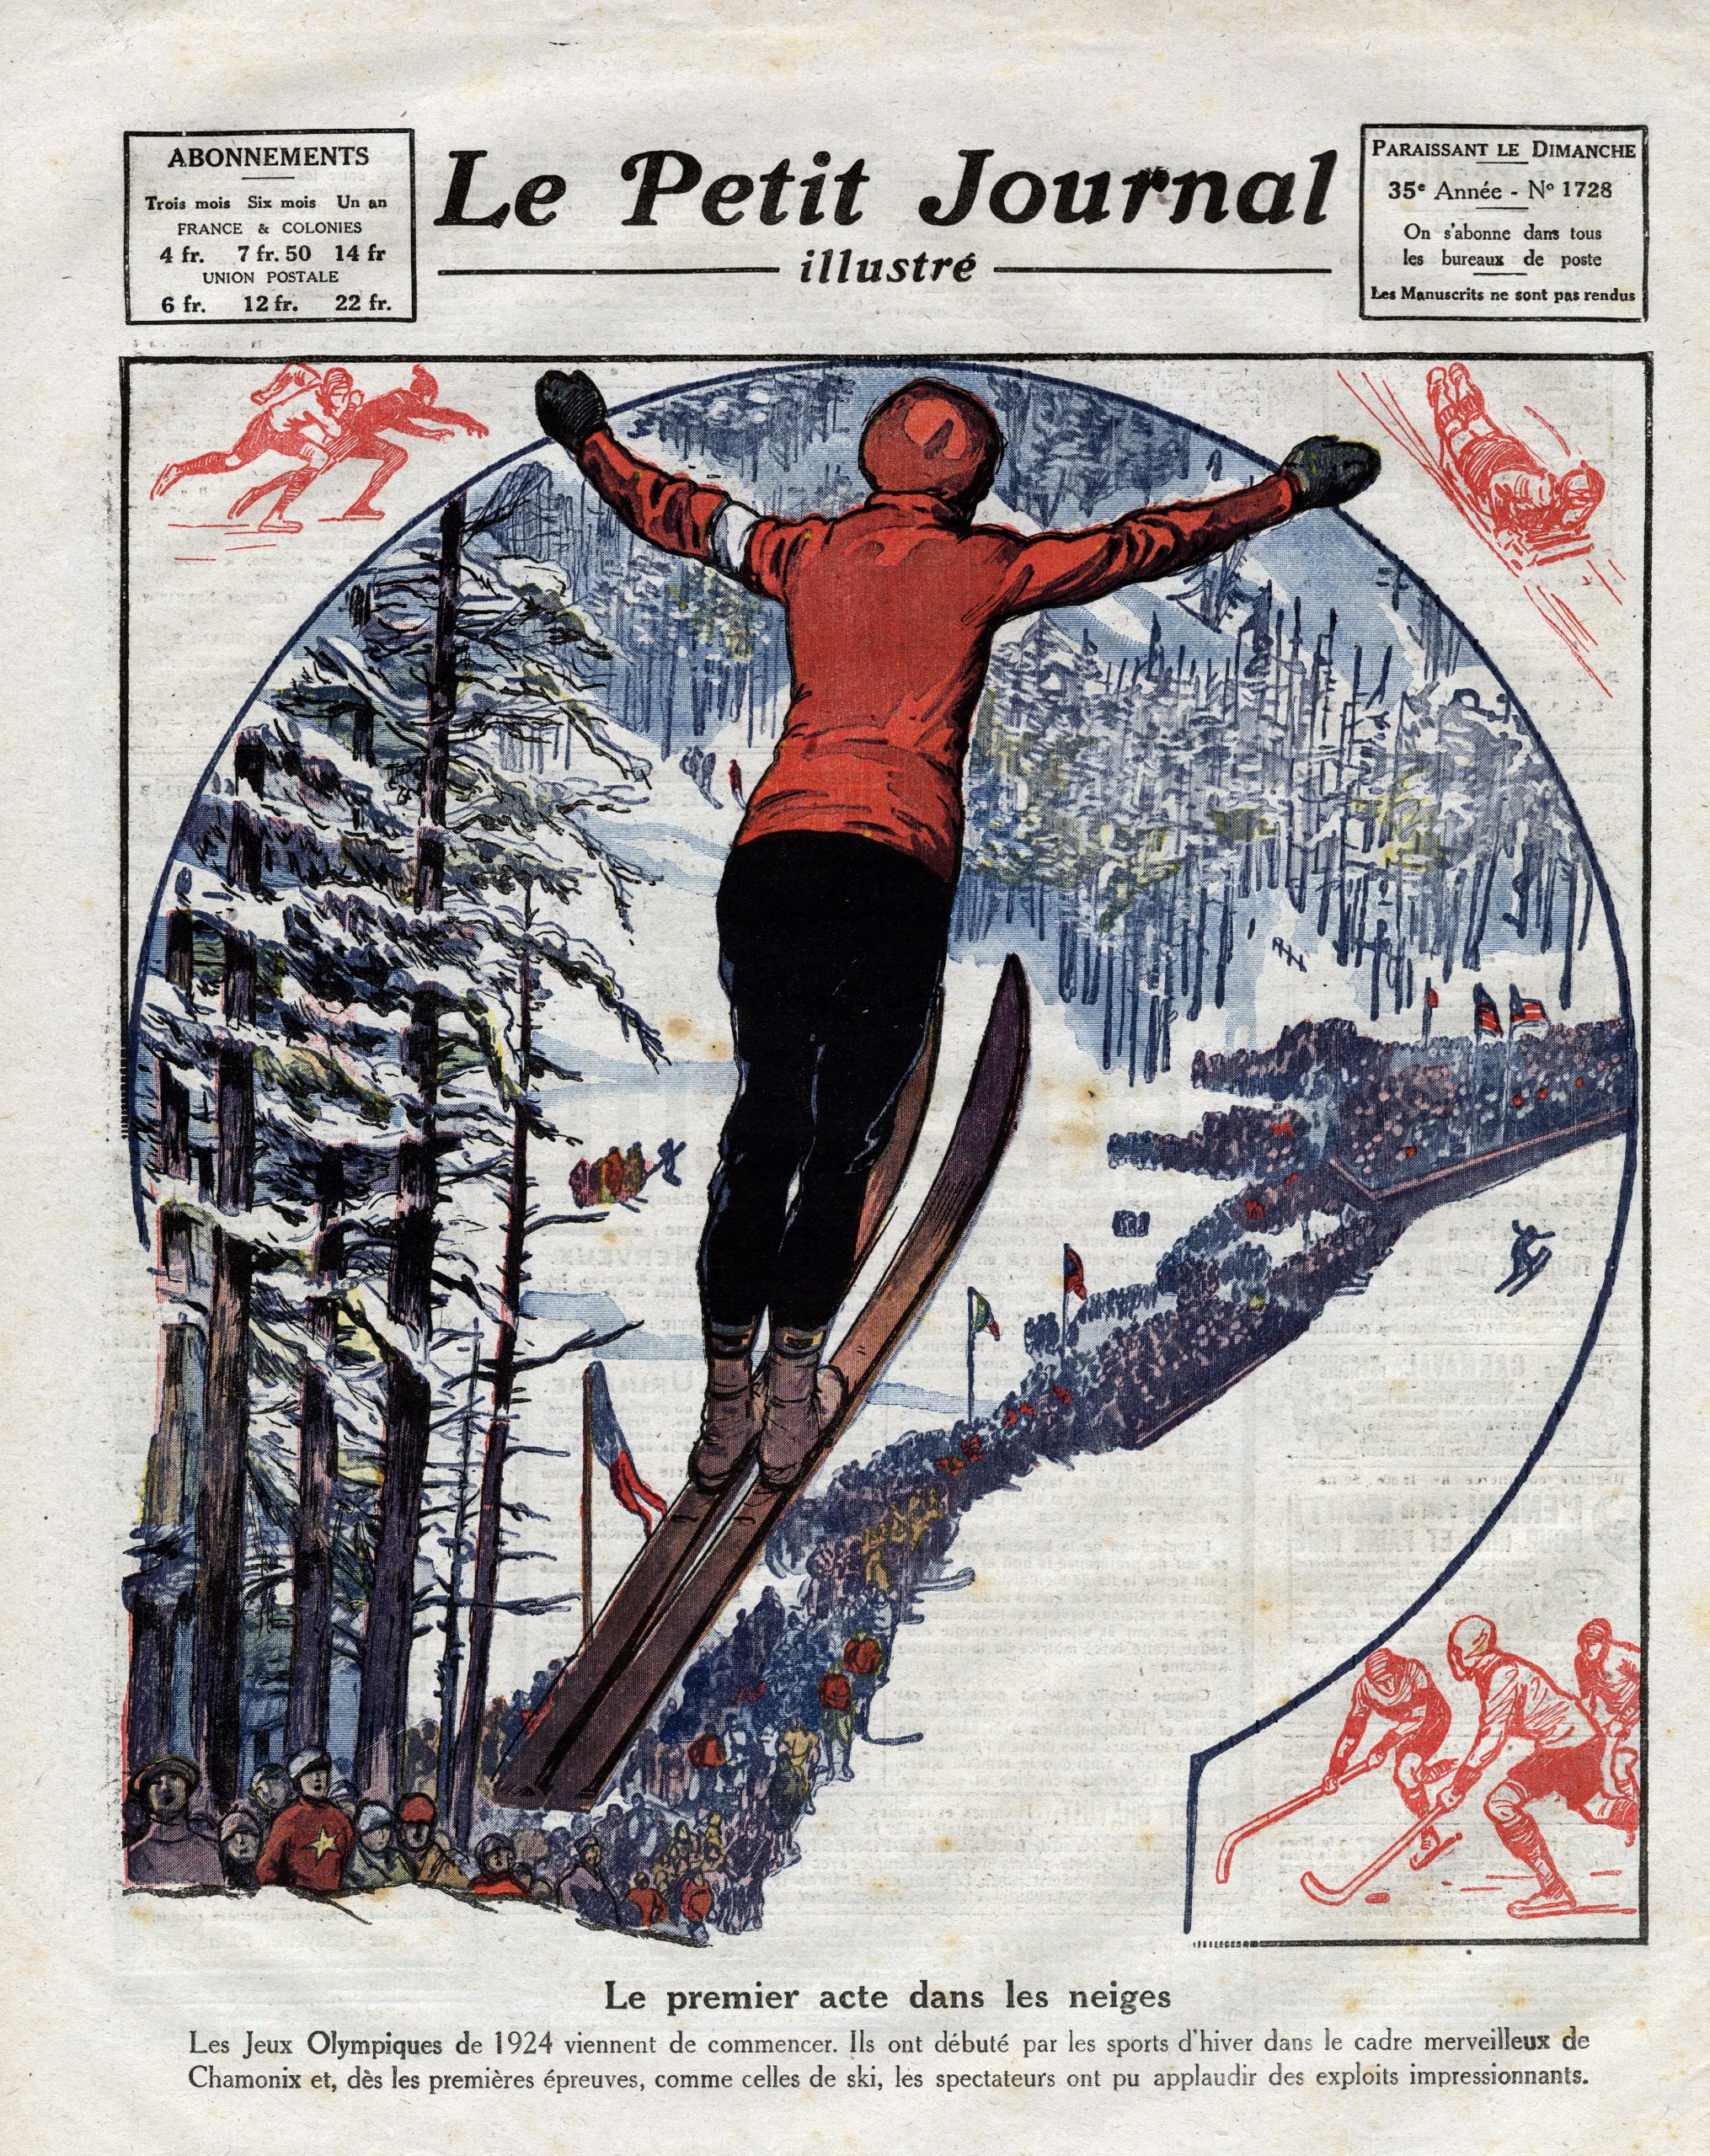 The cover of 'Le Petit Journal Illustree' features a drawing of a ski jumper at the 1924 olympics in Chamonix